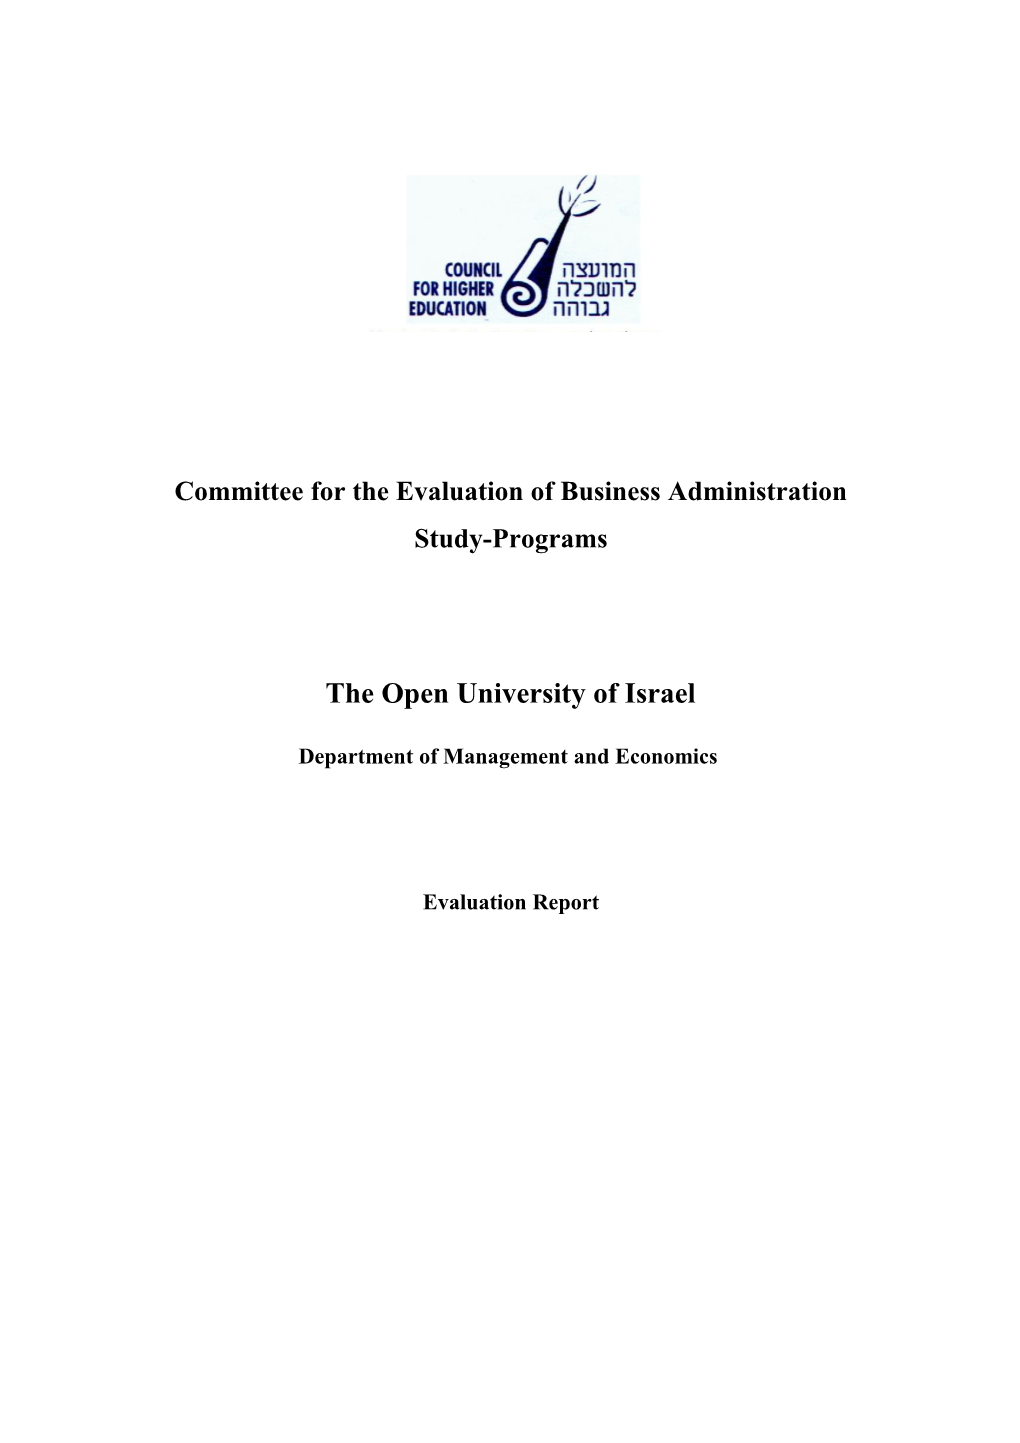 Committee for the Evaluation of Business Administration Study-Programs